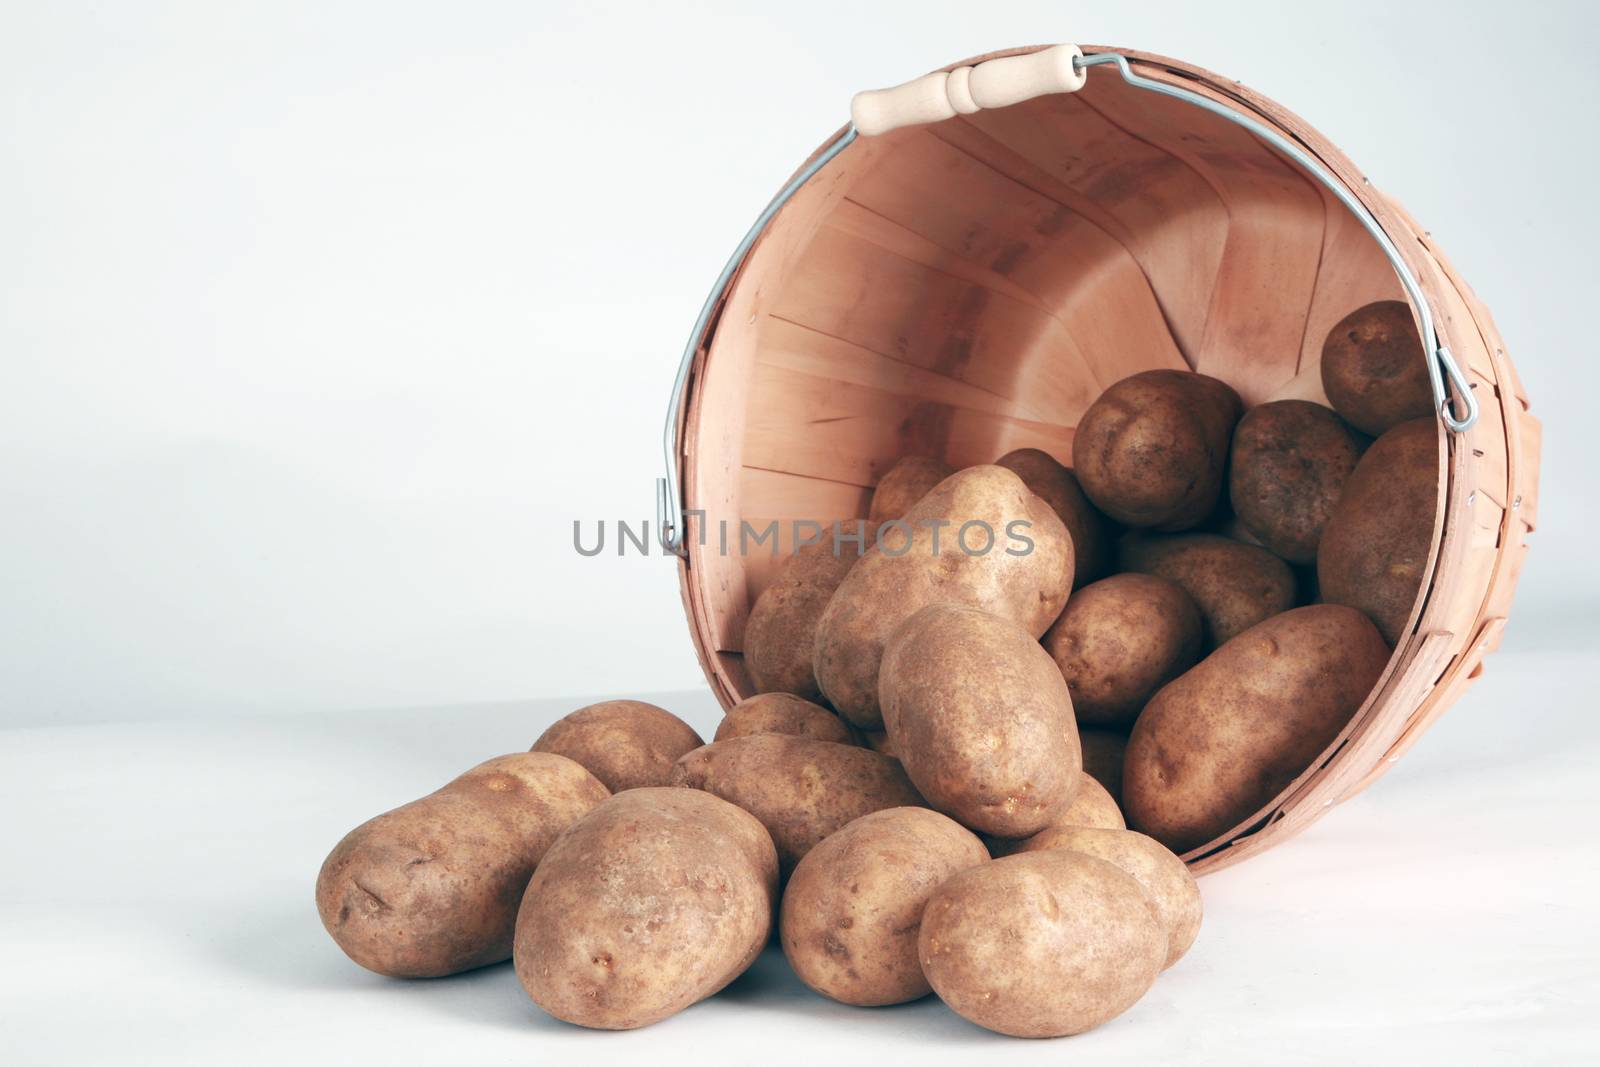 Whole potatoes coming out of a basket. by jimmartin